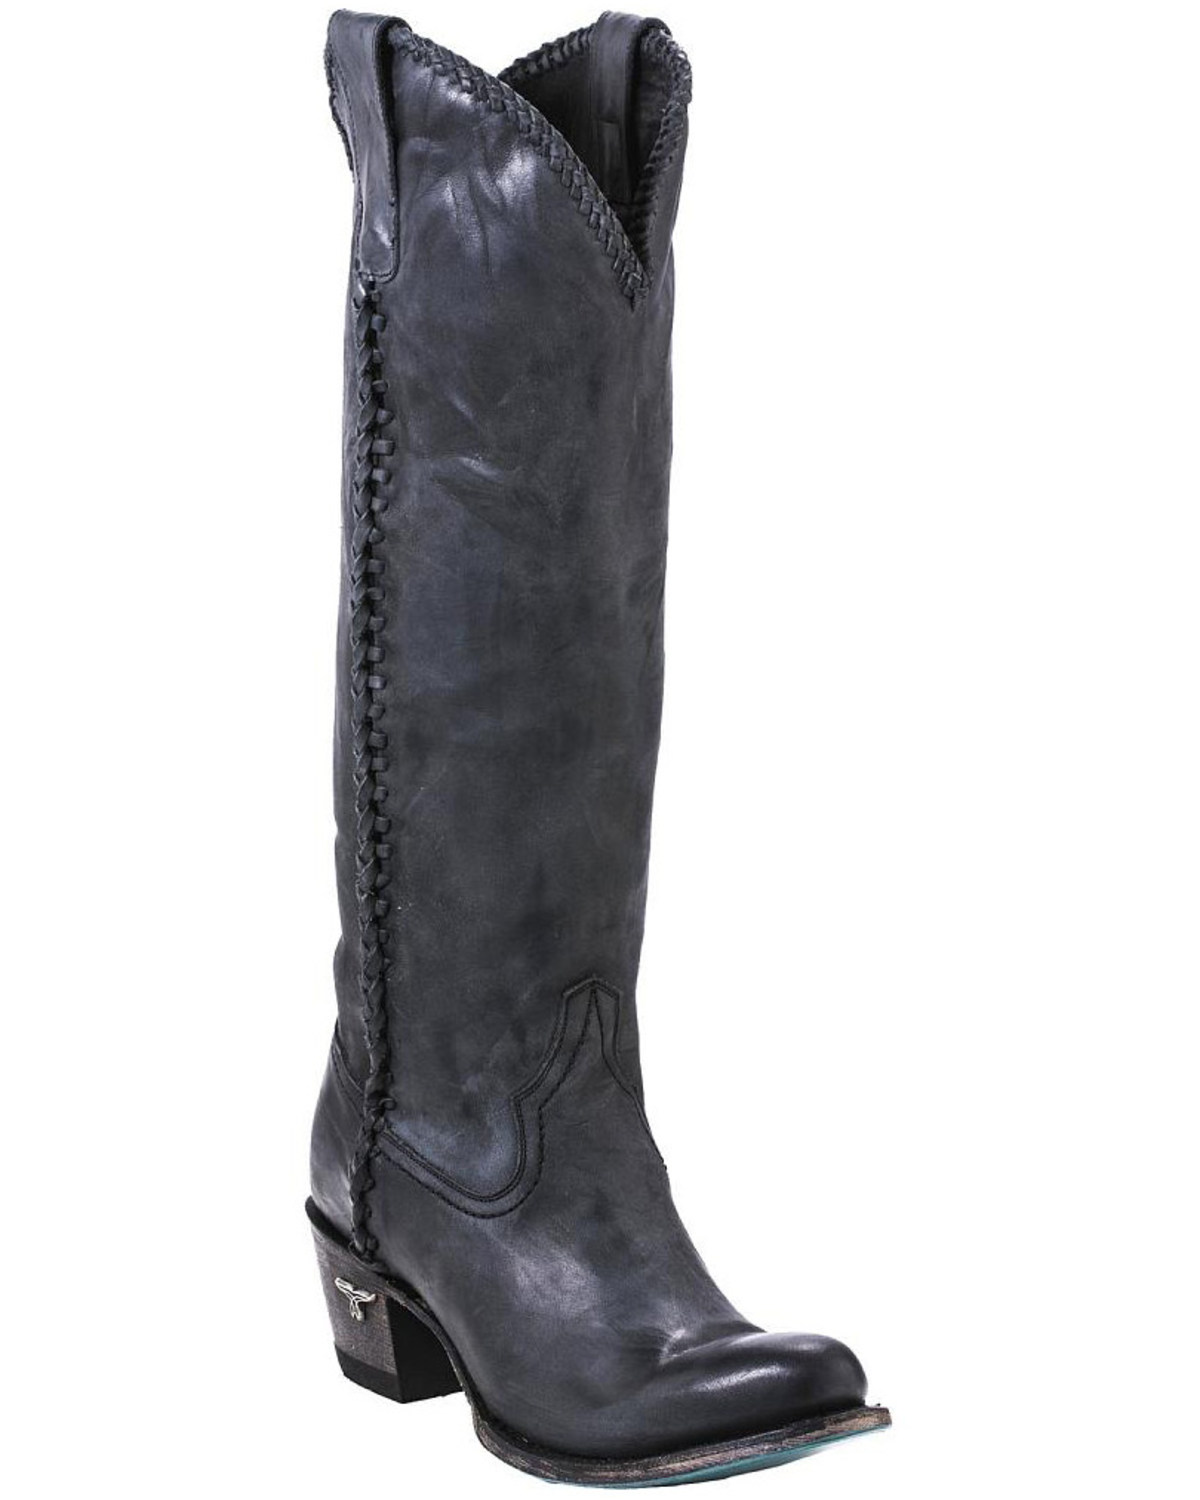 distressed black boots womens